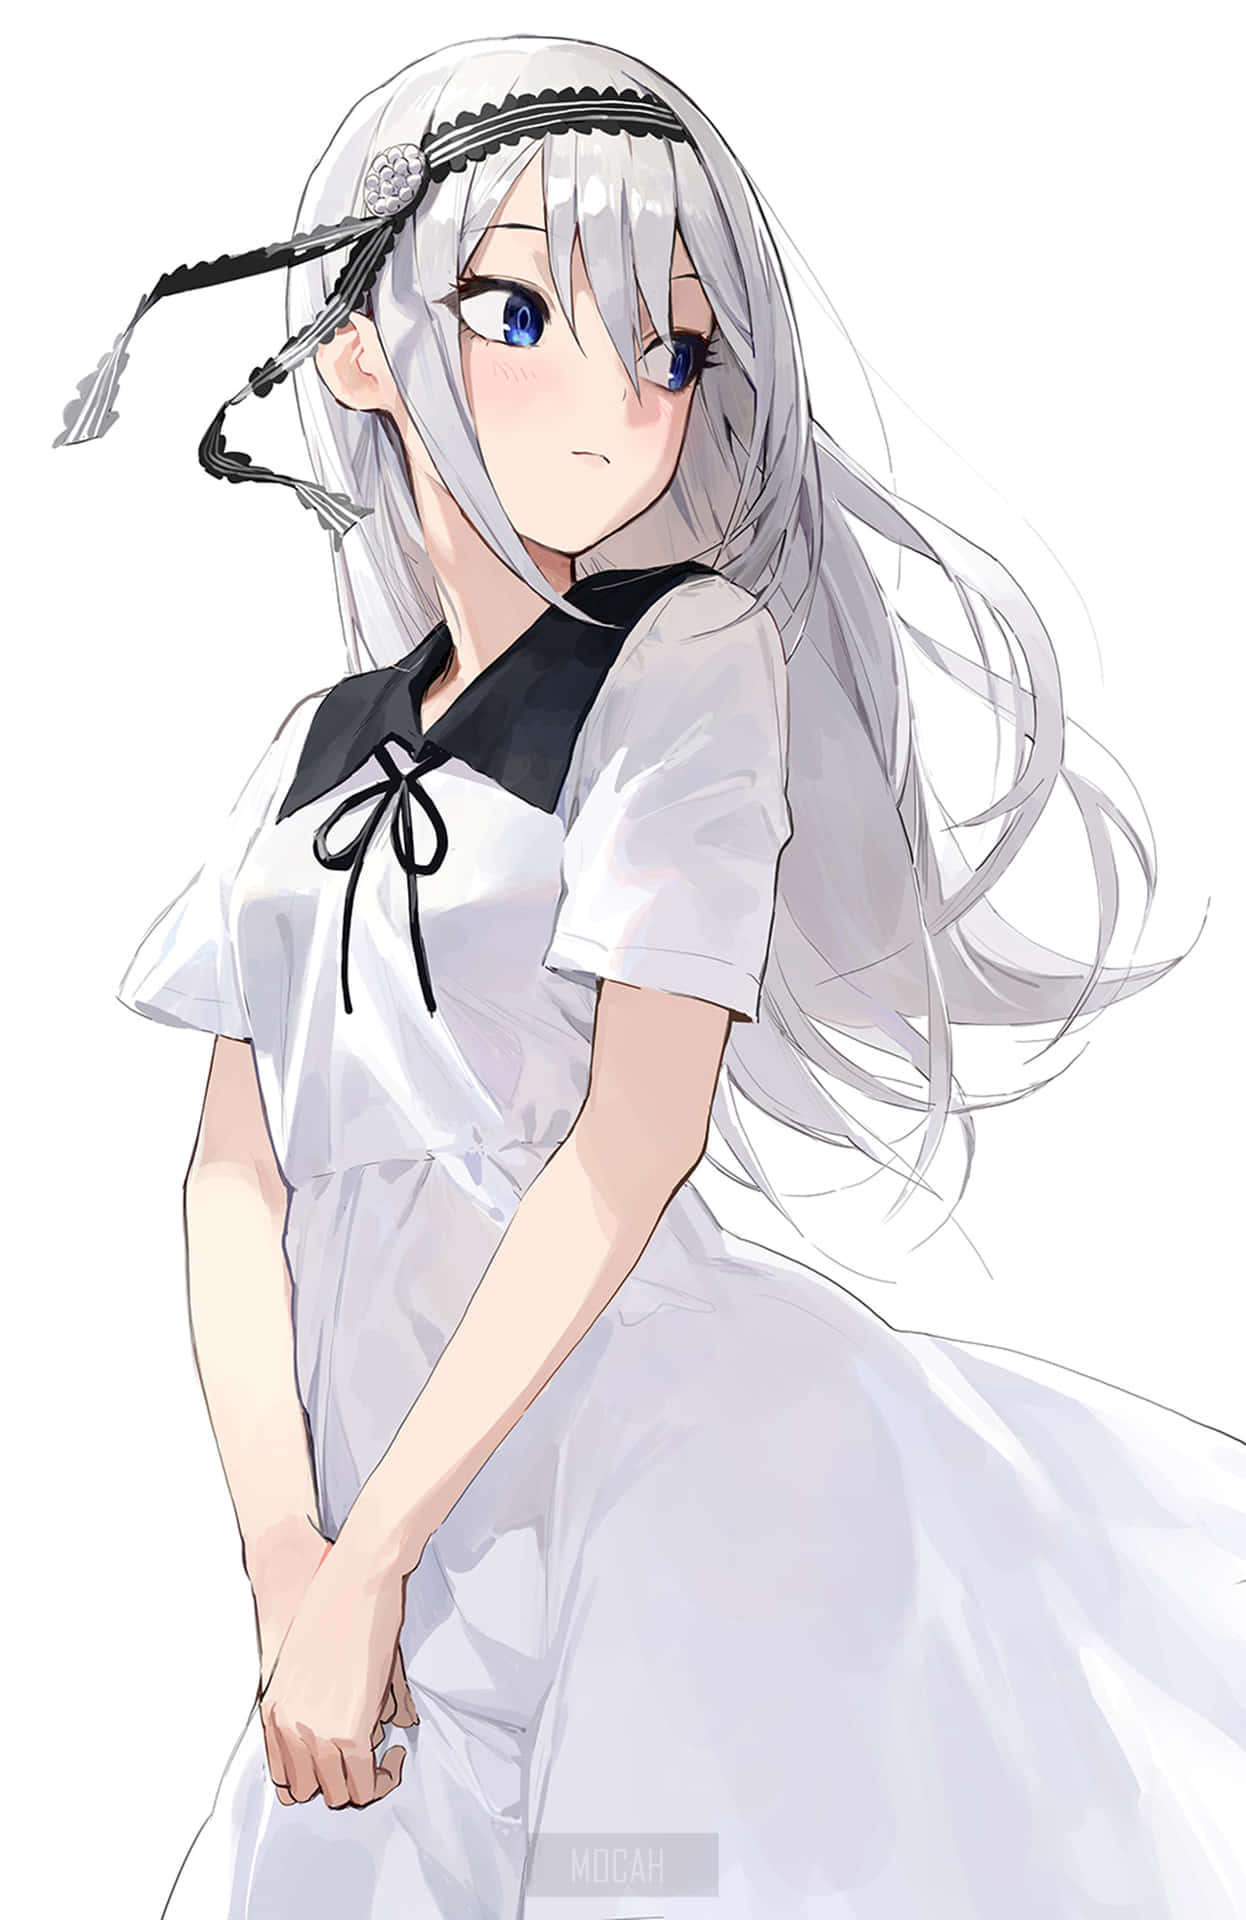 Explore the world of anime with Anime White Wallpaper